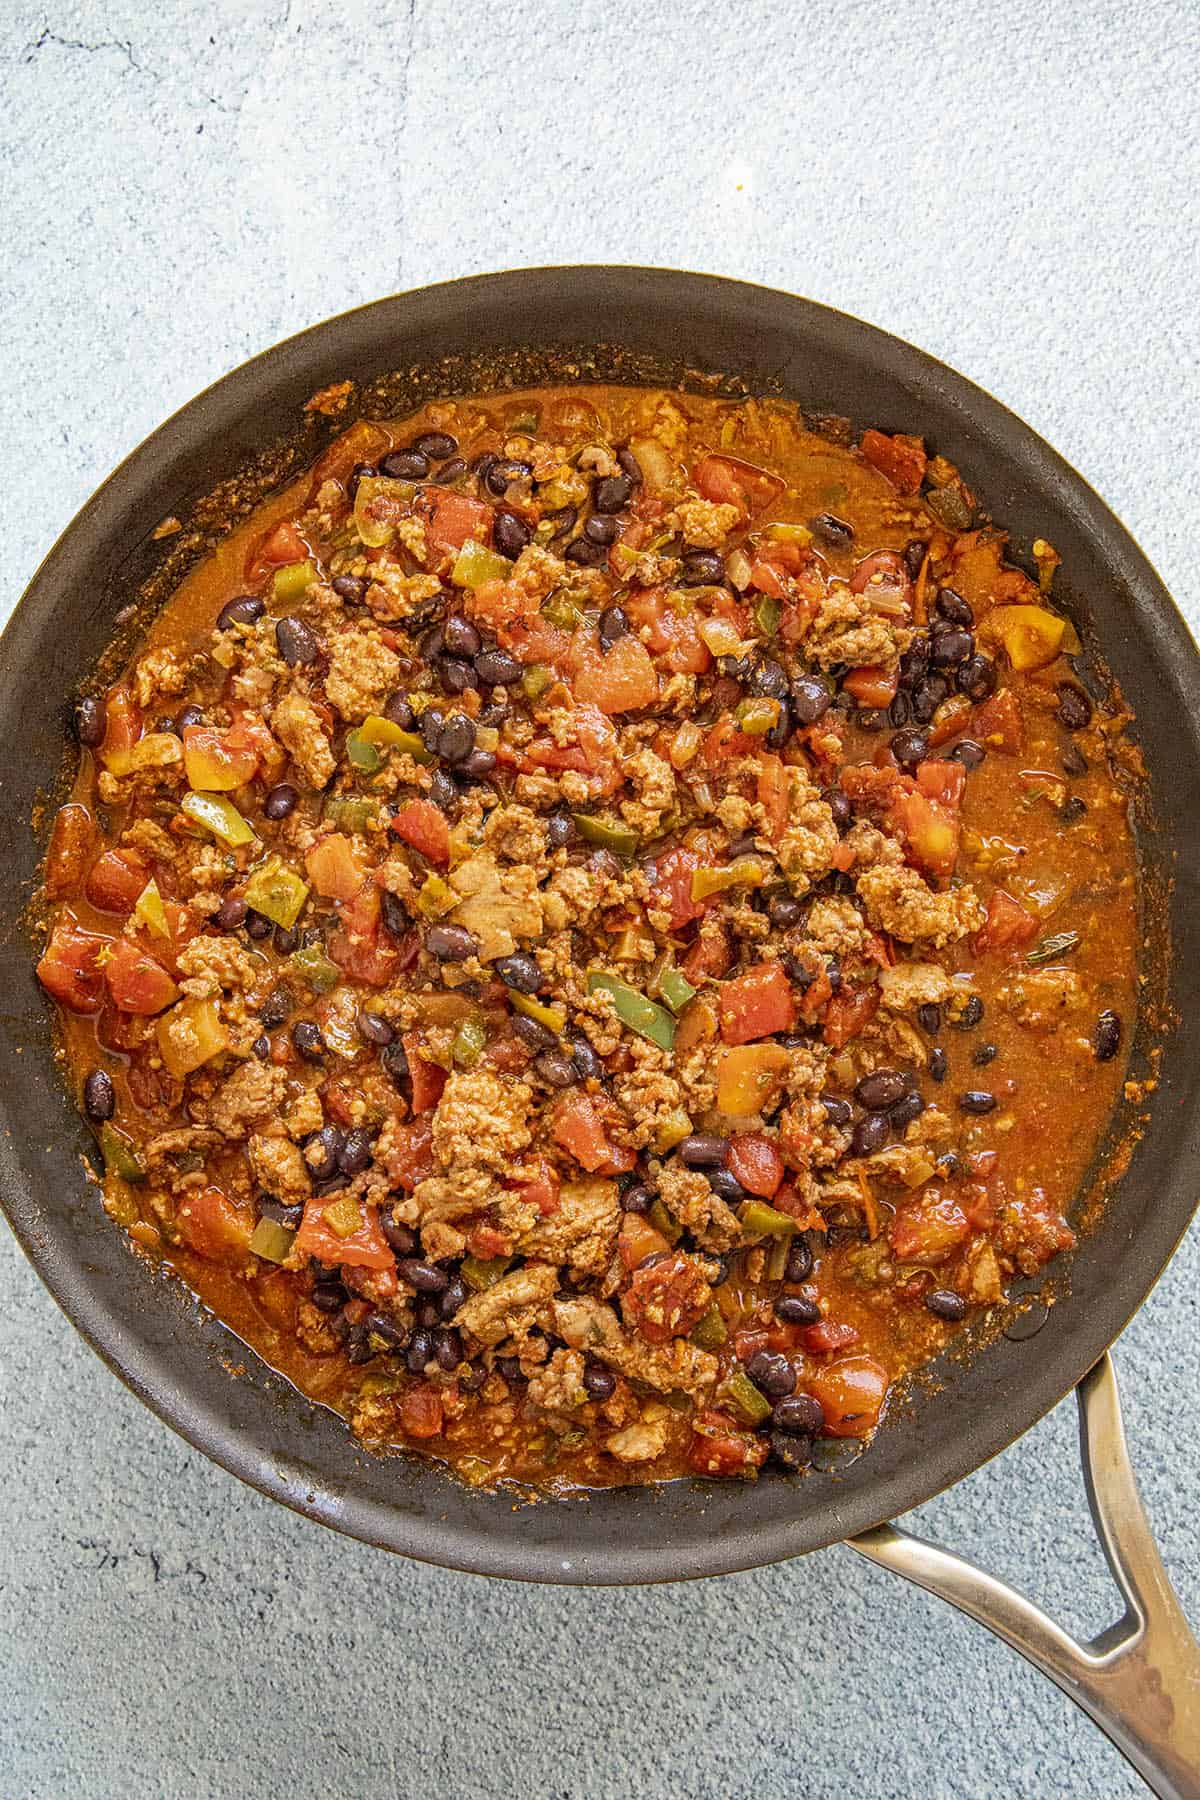 Cooked beef, beans, tomatoes and spices in a pan